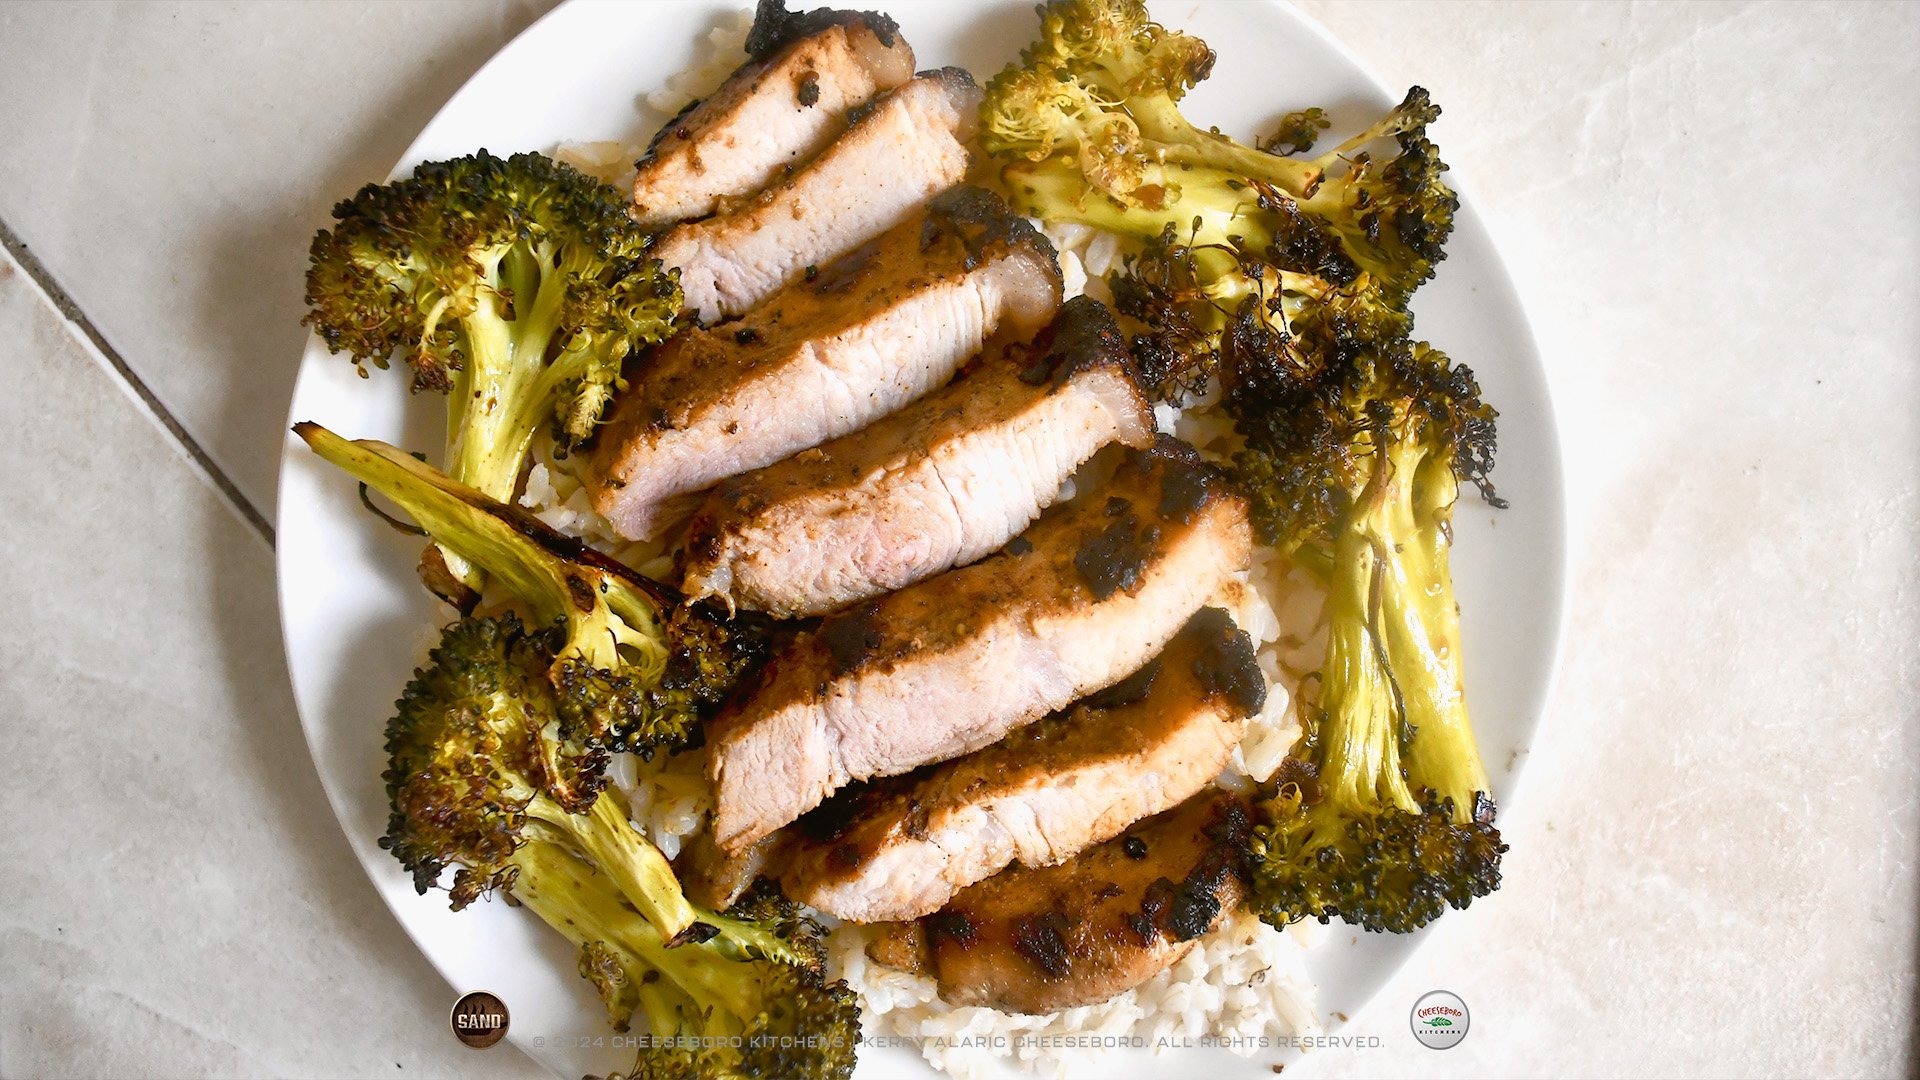 cheeskitch-240116-sand-combo-beef-garden-grilled-pork-chop-with-balsamic-broccoli-top-view-1-1920-hor.jpg